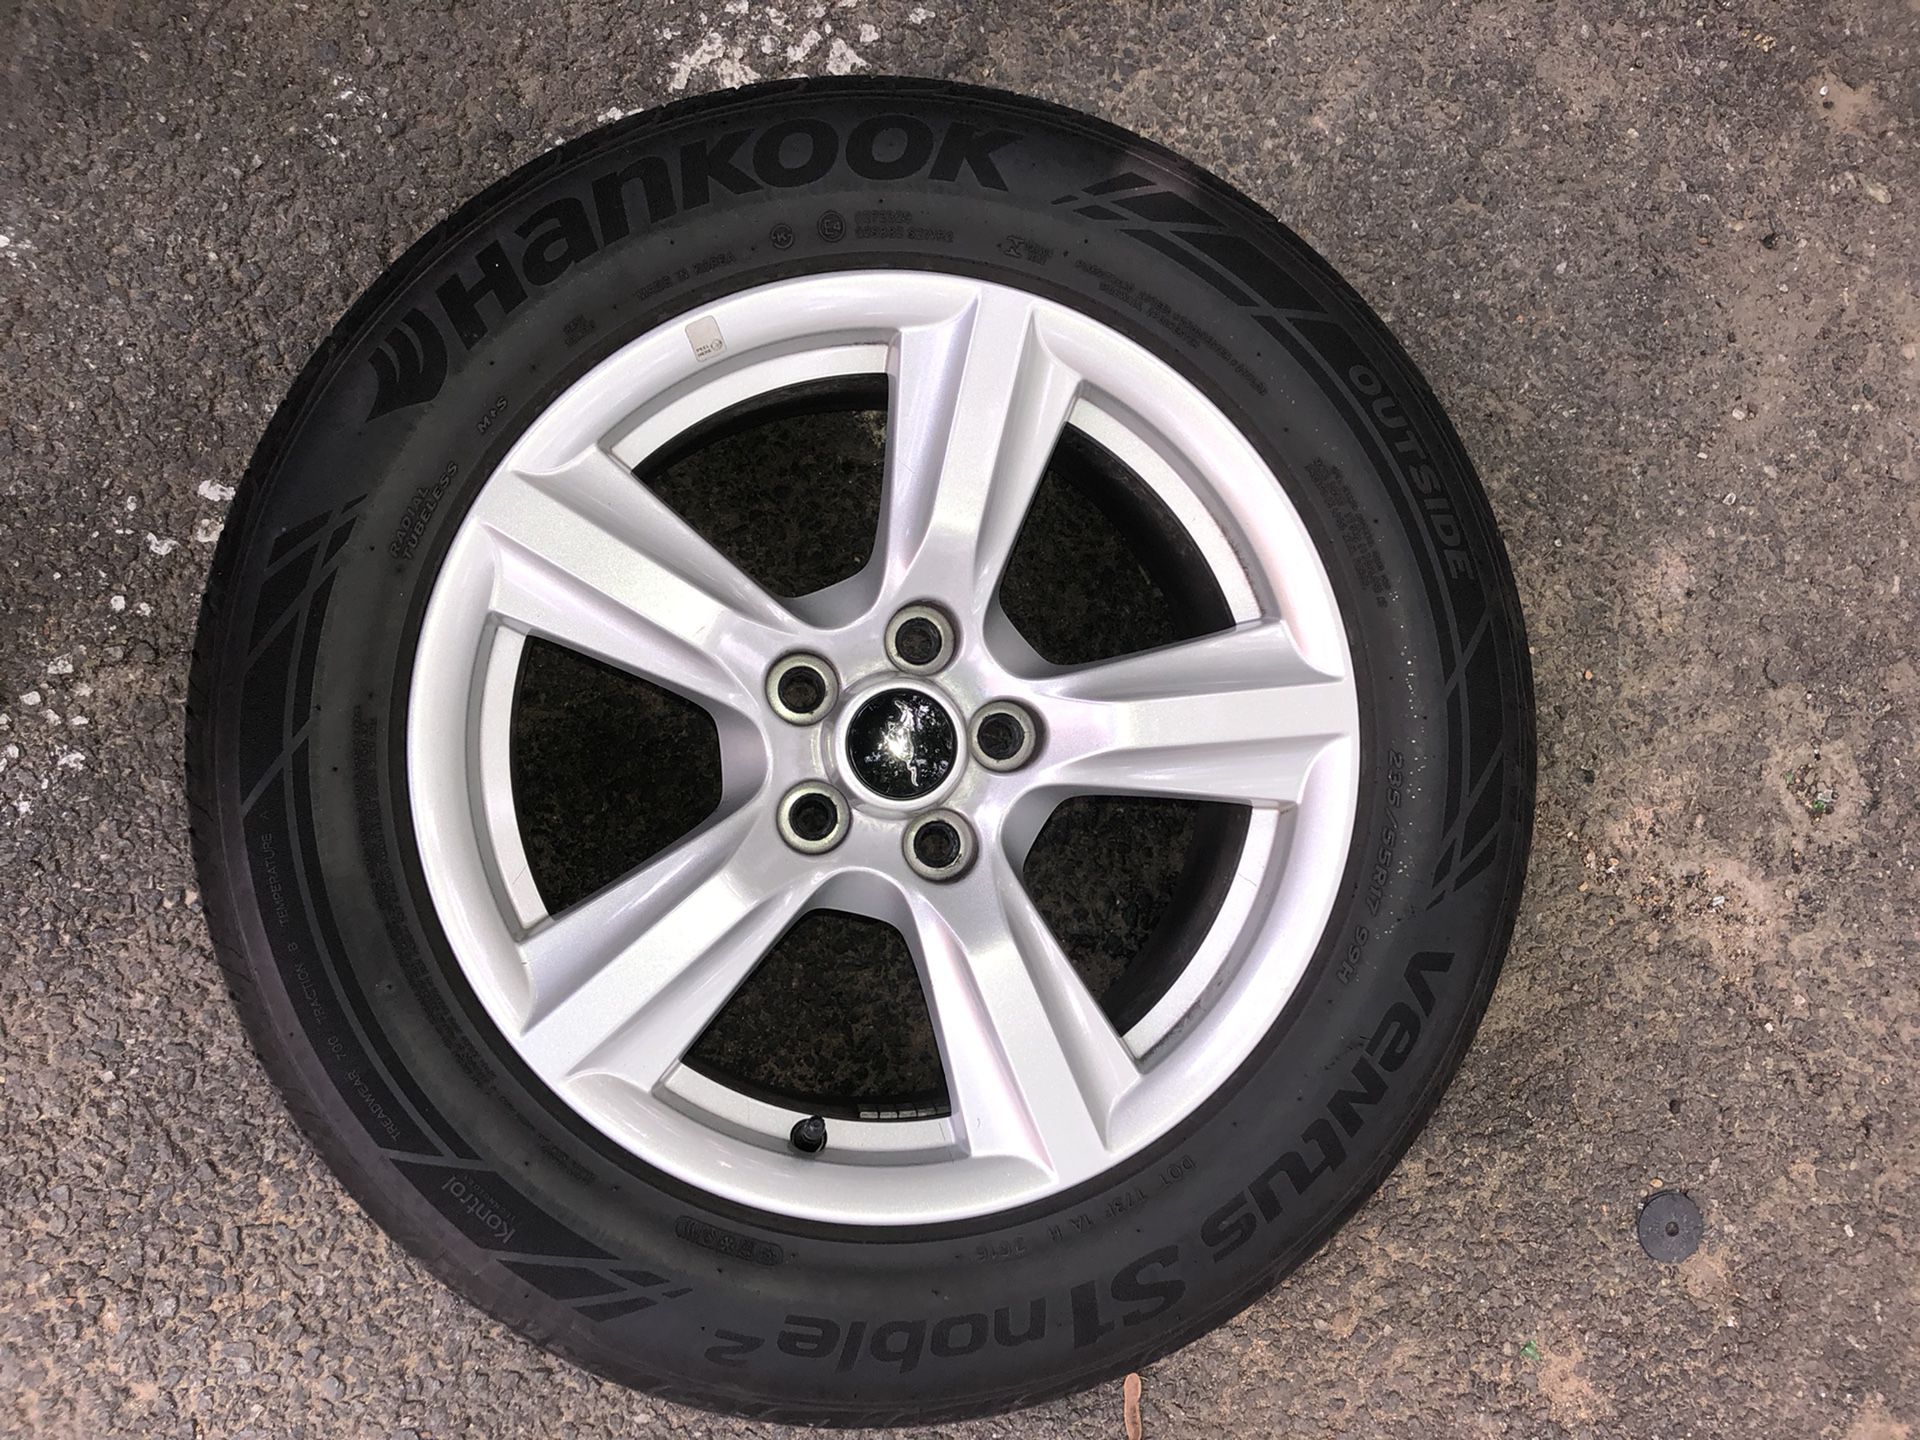 2015-2020 Stock Mustang rims and tires